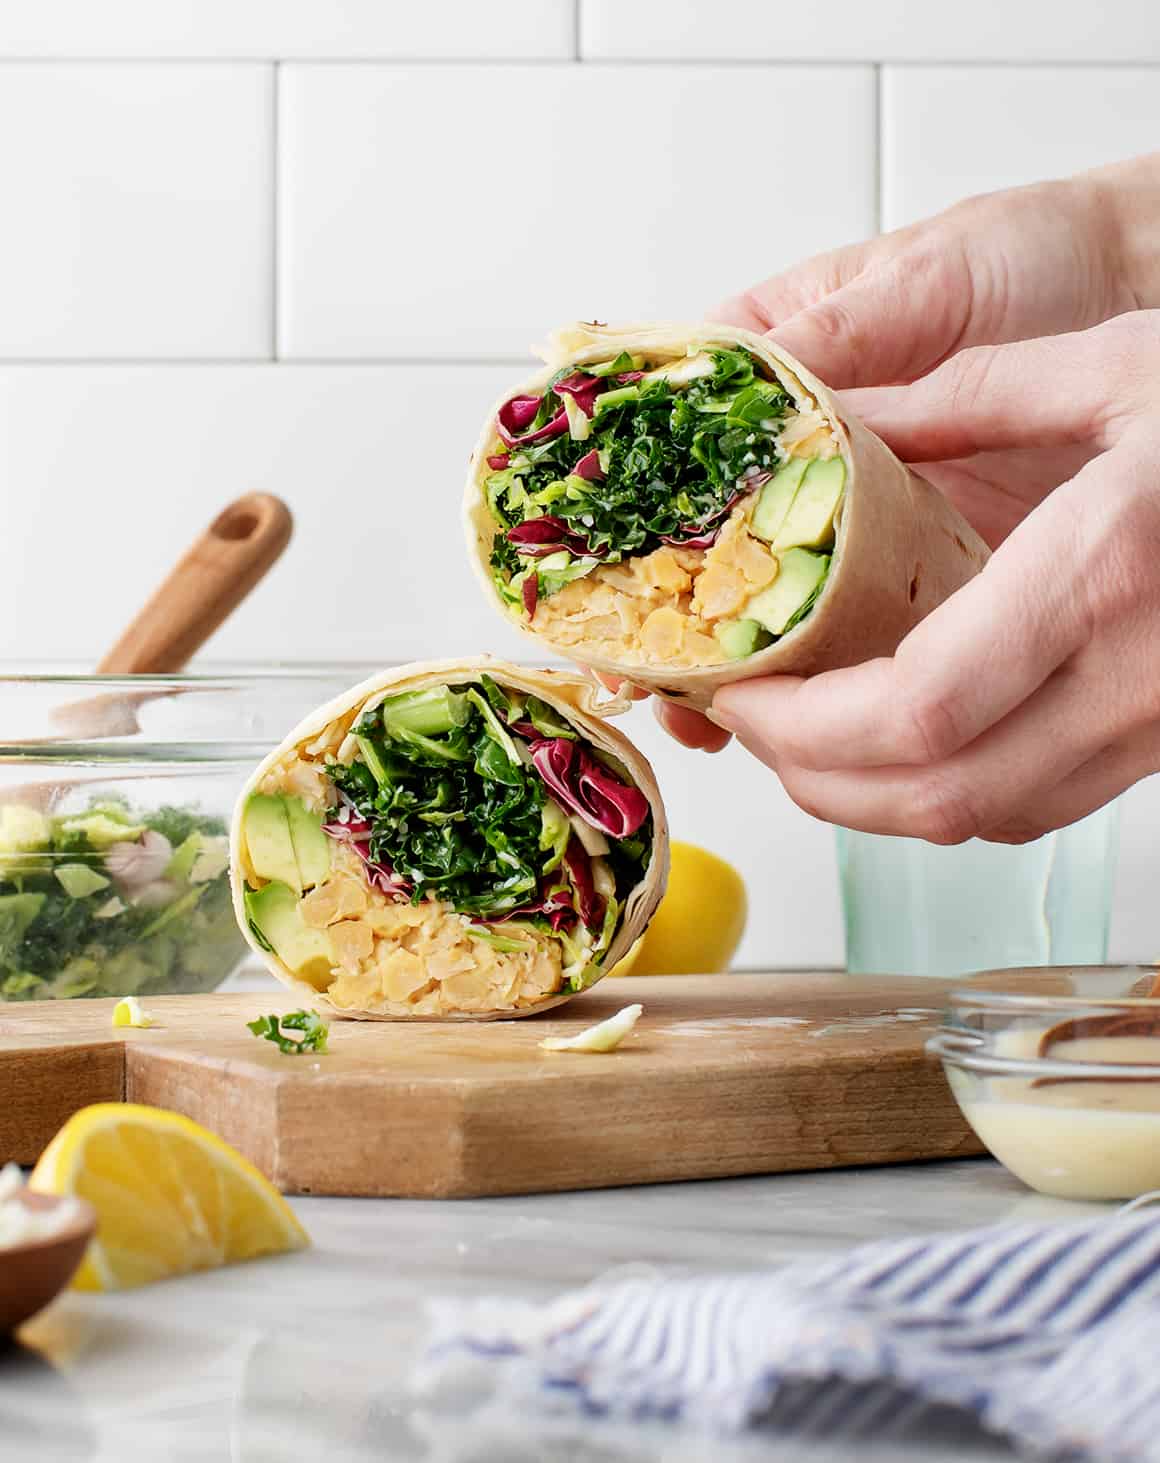 Hands holding sliced healthy lunch wraps